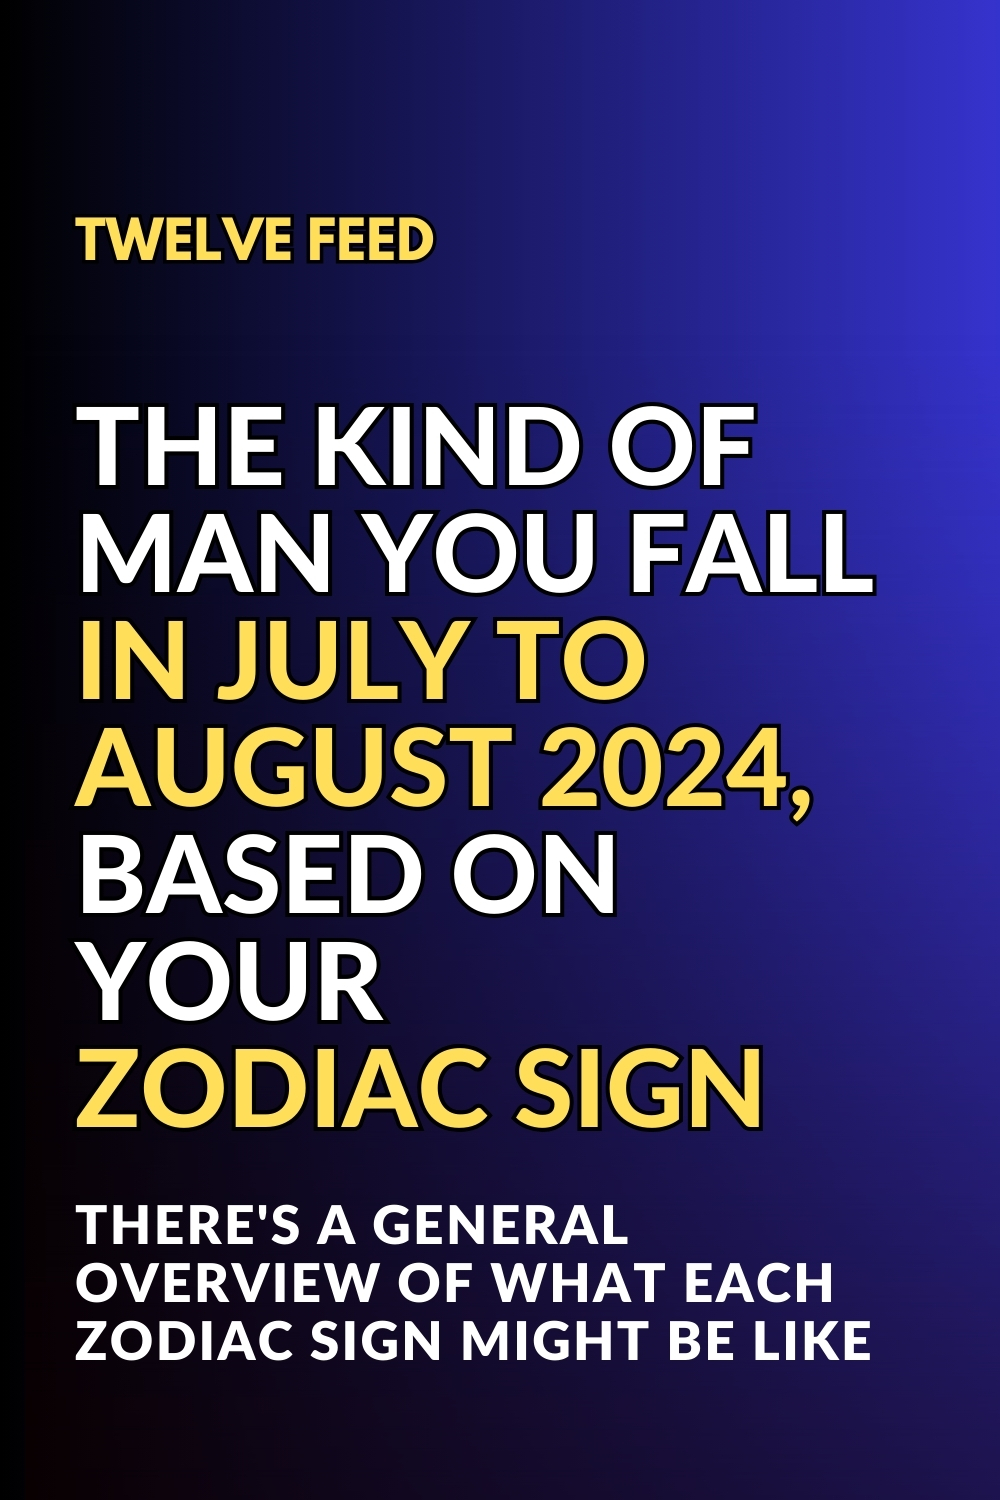 The Kind Of Man You Fall In July To August 2024, Based On Your Zodiac Sign